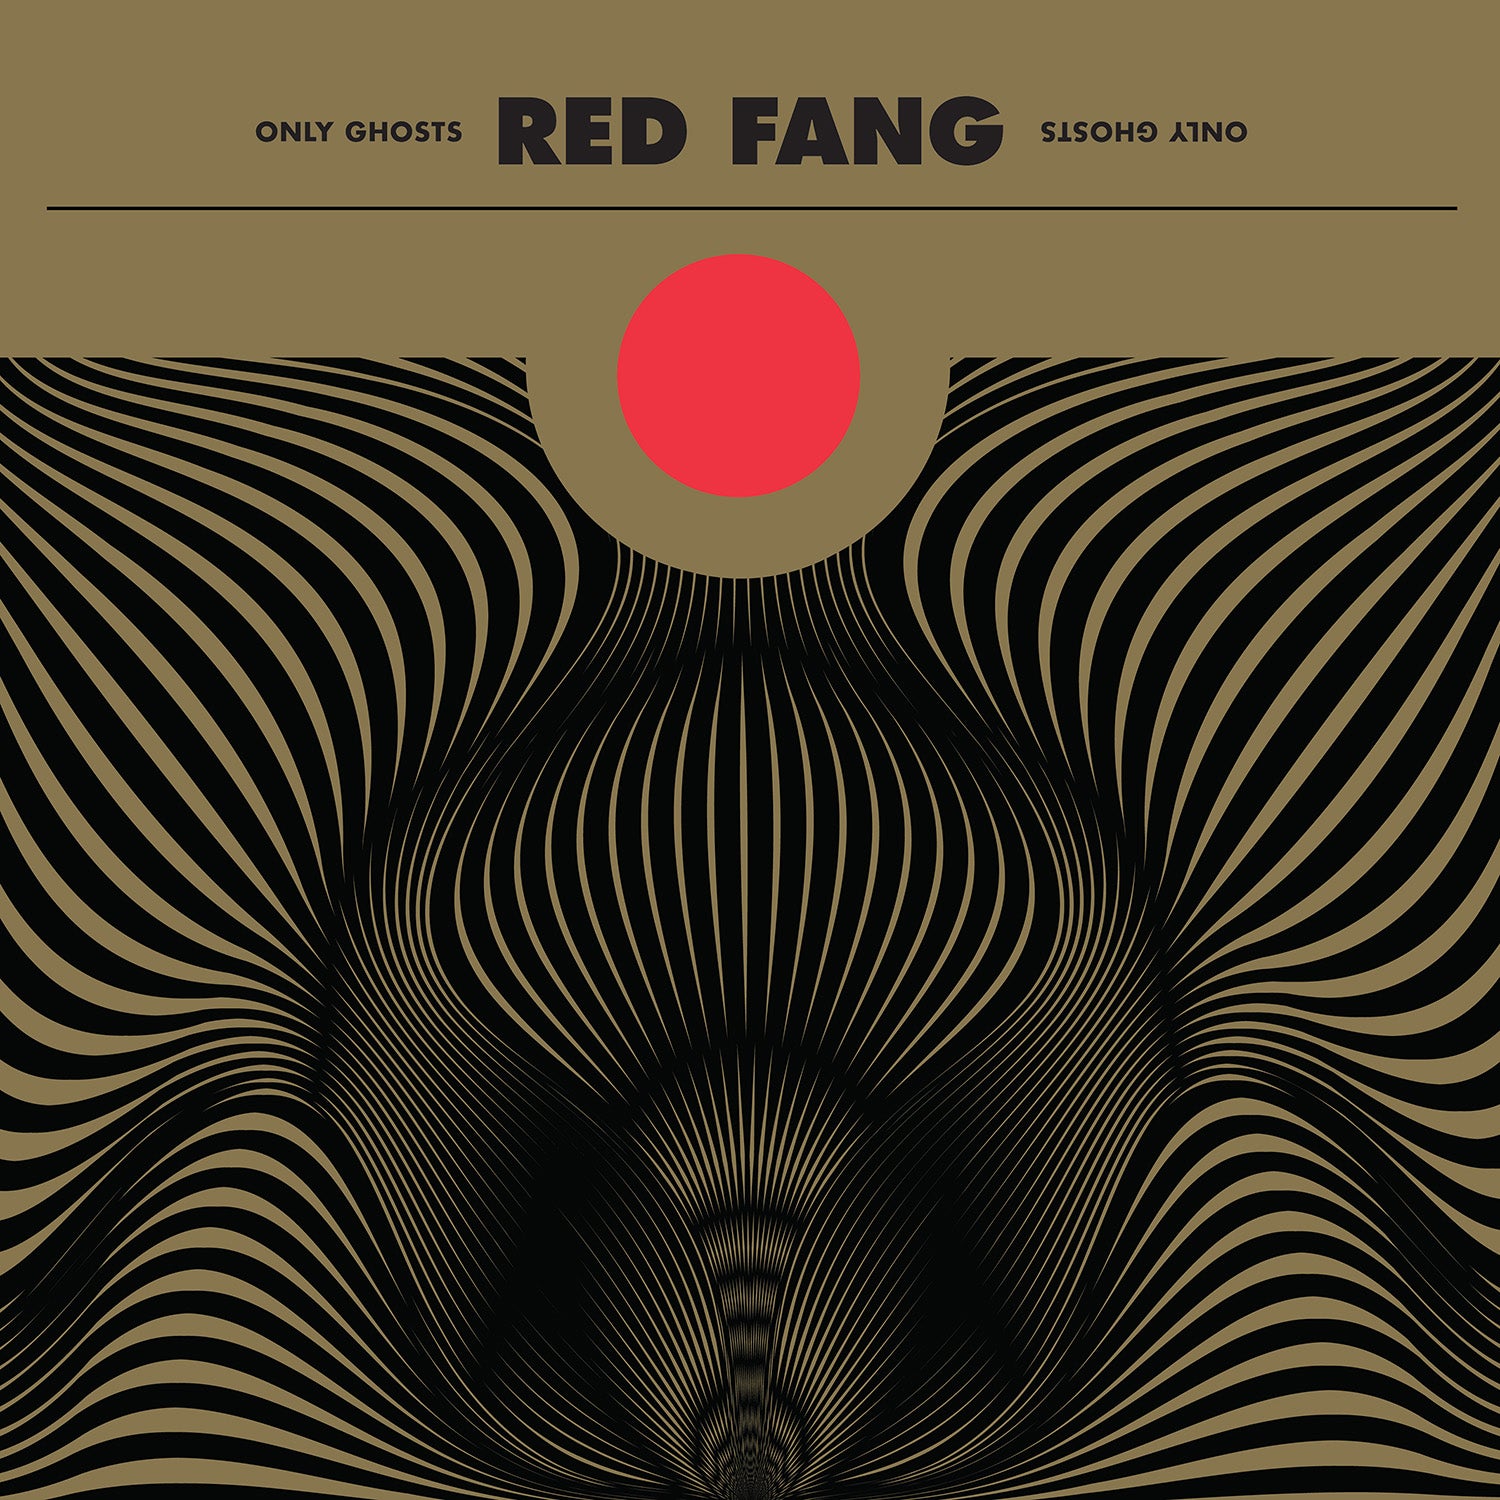 RED FANG - ONLY GHOSTS (Gold & Black Galaxy Merge Vinyl) LP